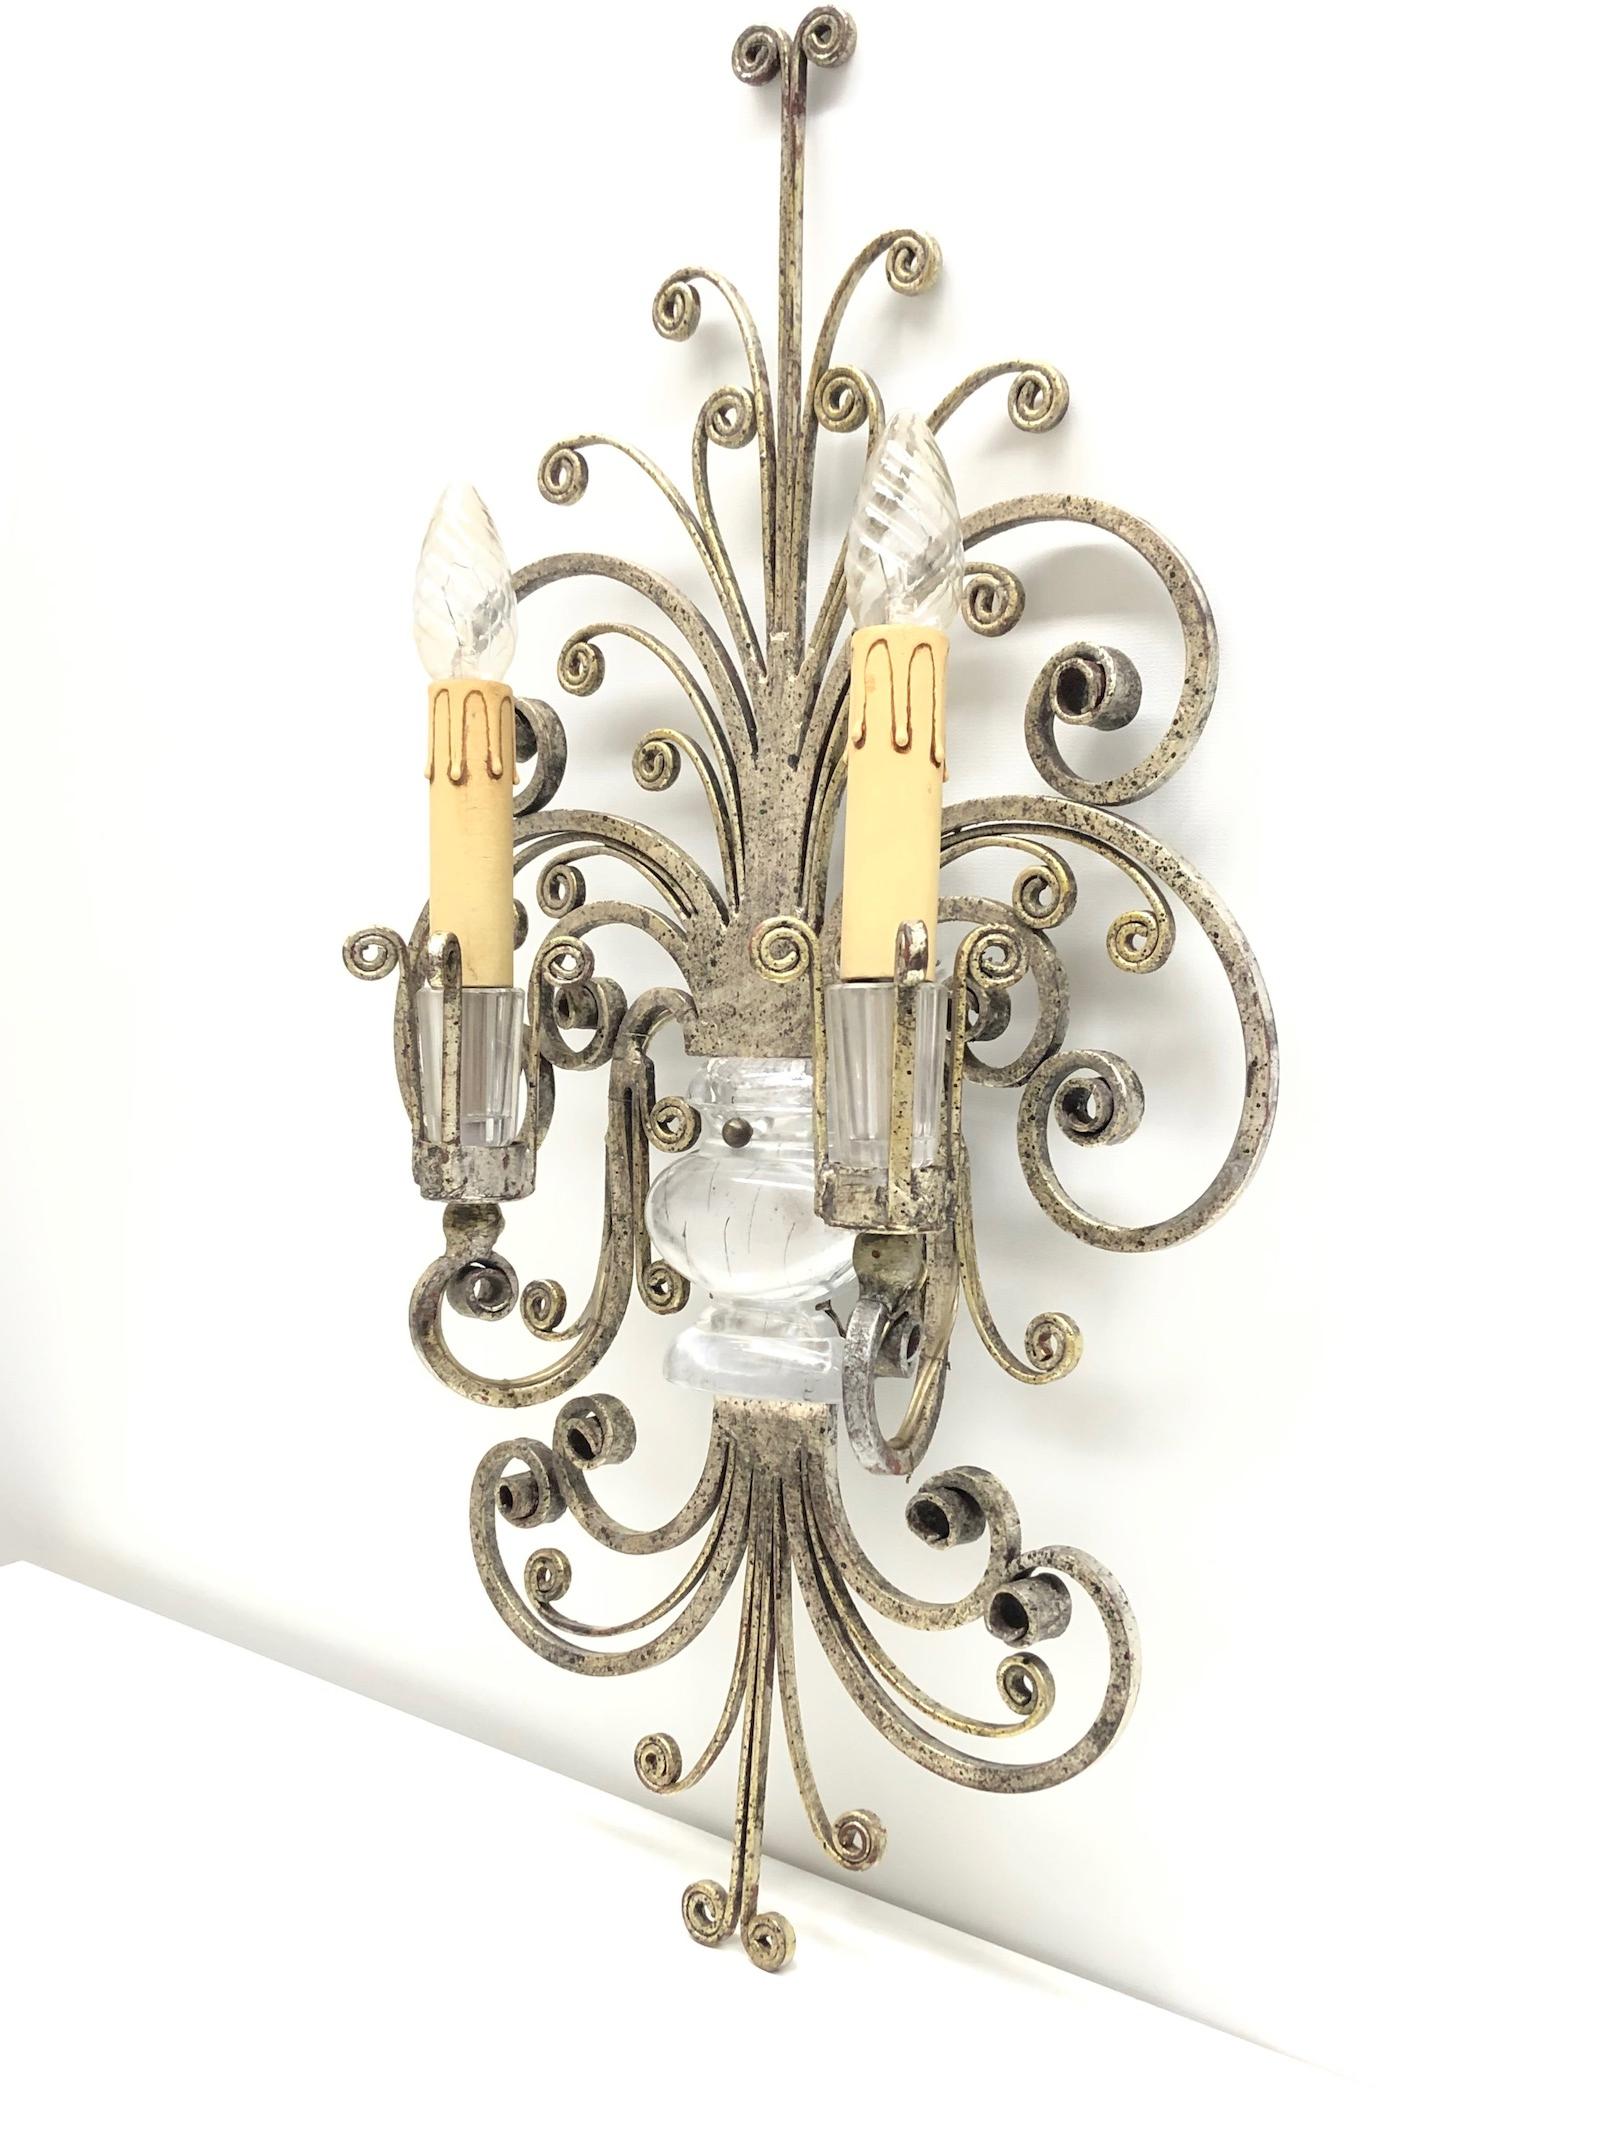 Single monumental Italian Crystal Urn Motif Flower Wall Sconce by Banci Florence In Good Condition For Sale In Nuernberg, DE